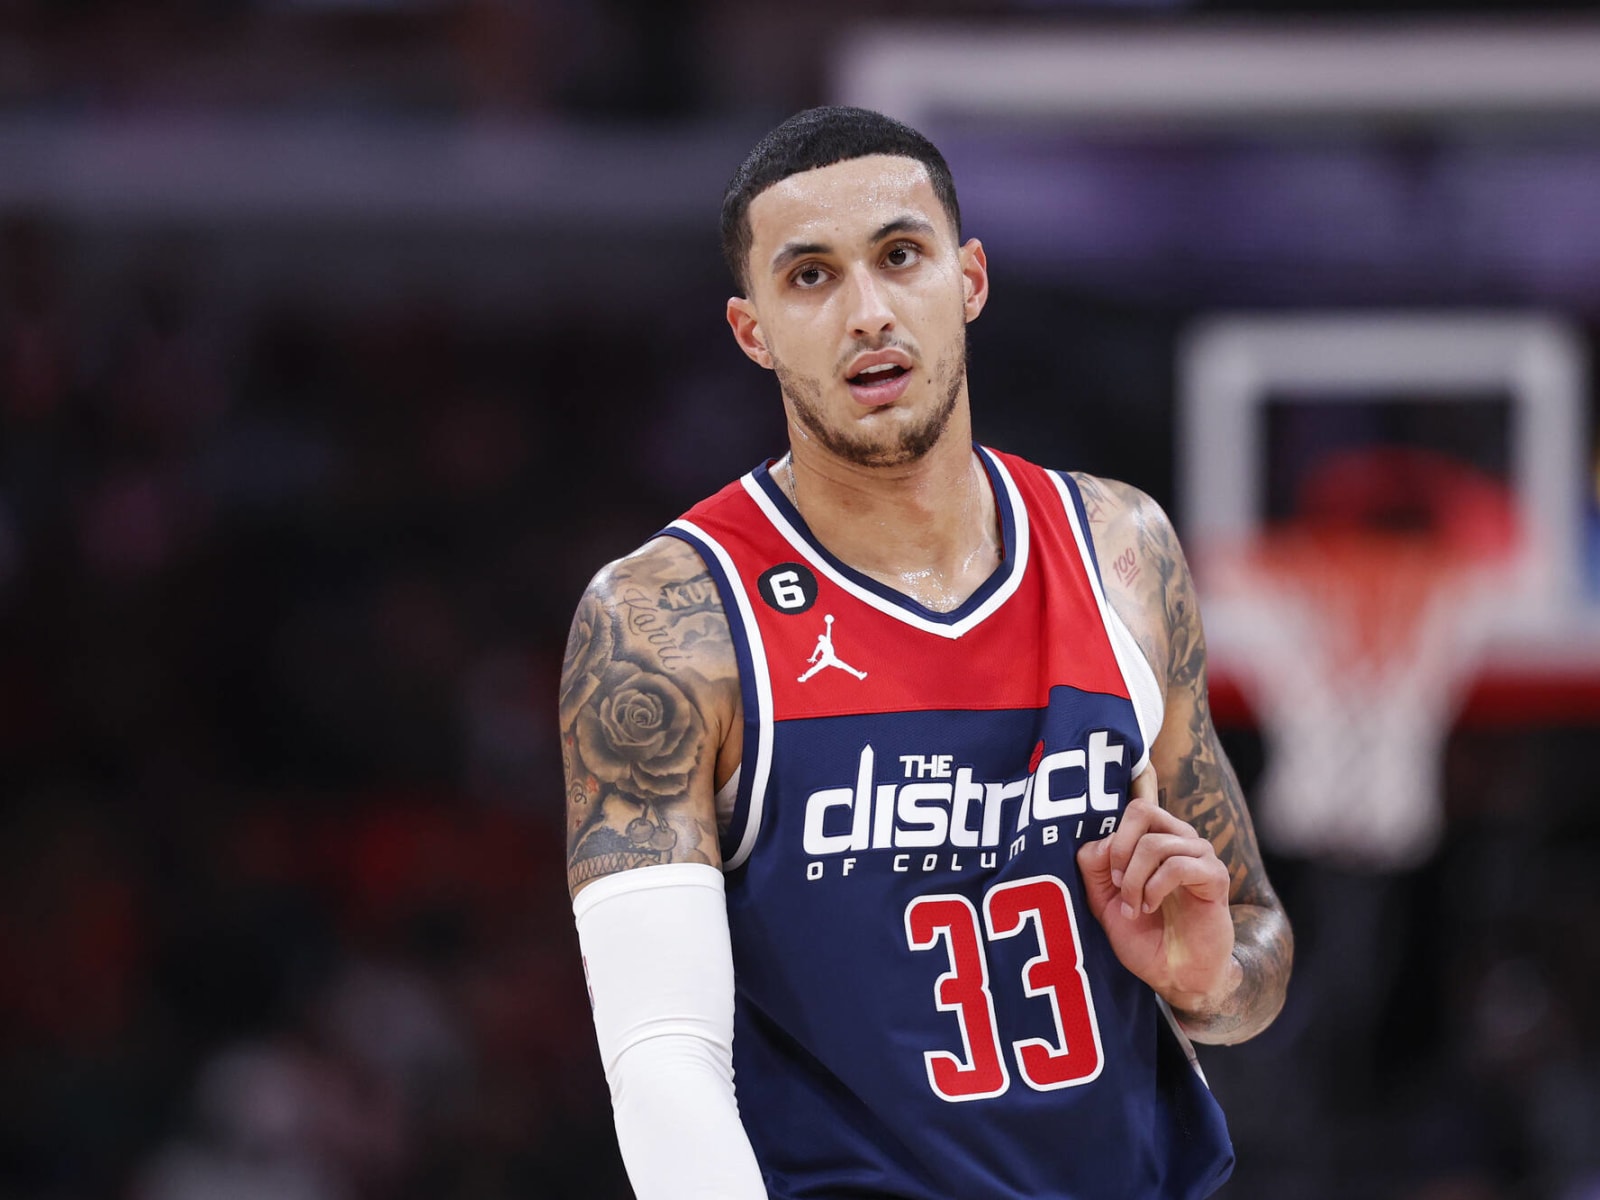 Lakers forward Kyle Kuzma to wear goggles to protect right eye